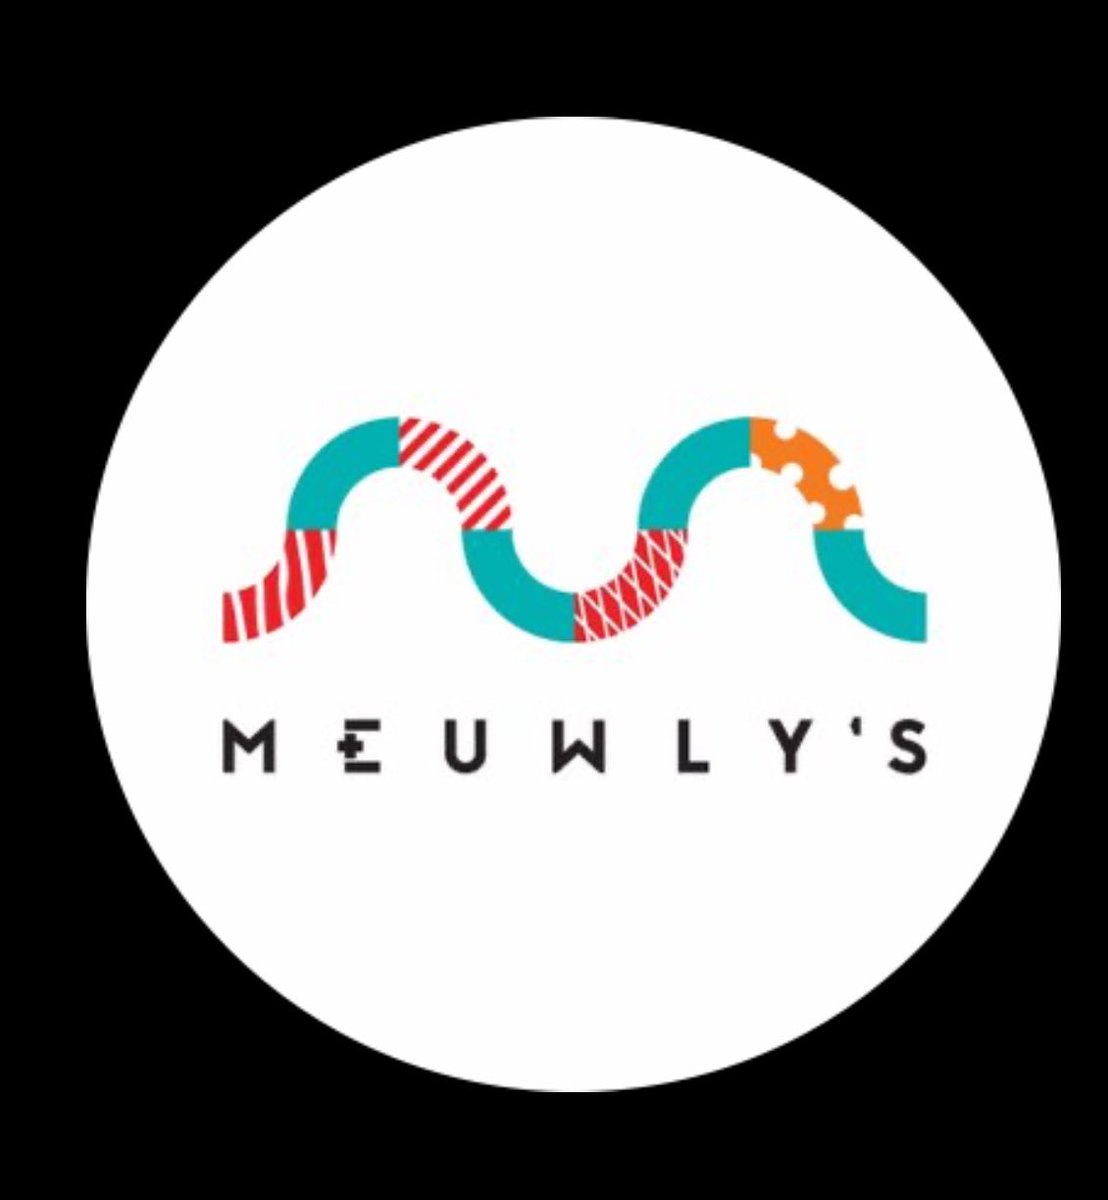 Want to learn more about Beer & Charcuterie pairings? Join @Meuwlys & @ABBEERFESTIVALS for a hands on workshop at #gowest24 #gowestlive